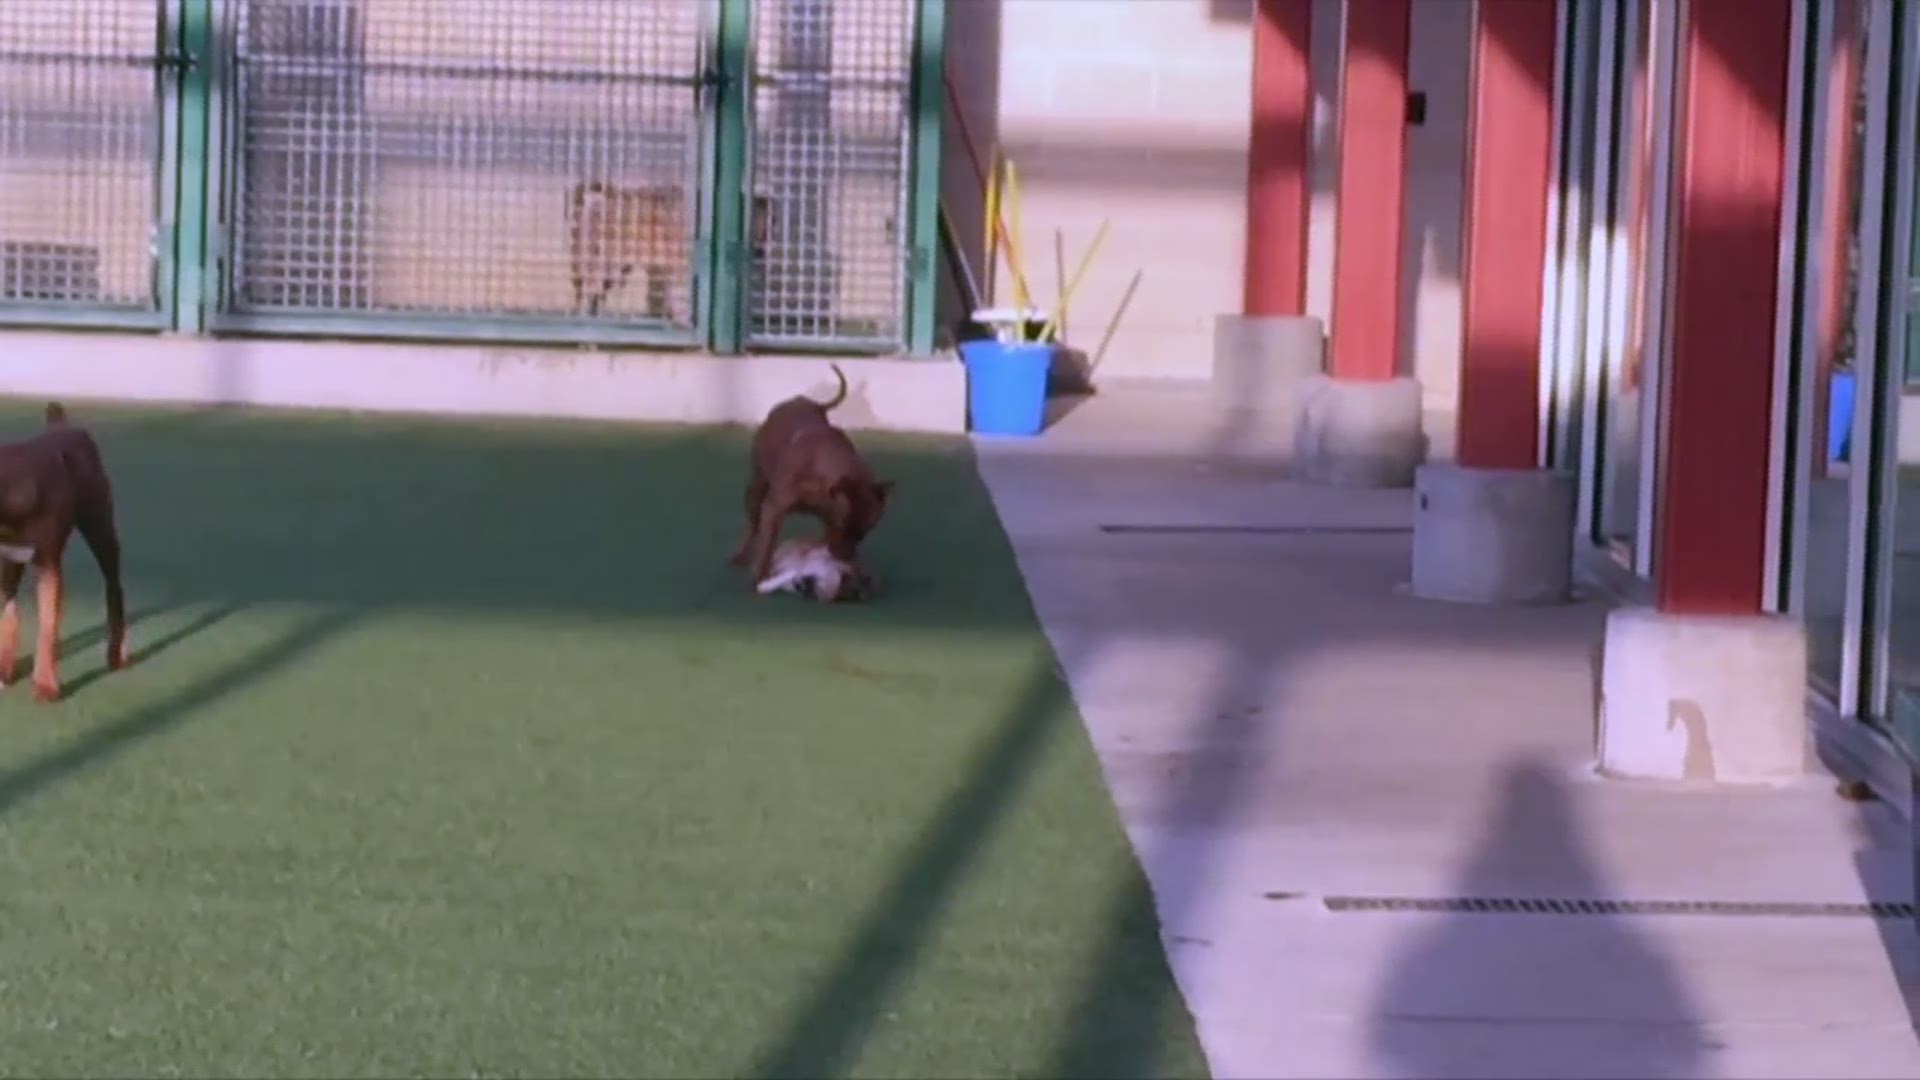 VIDEO: No workers in sight as pit bull attacks smaller dog at animal shelter